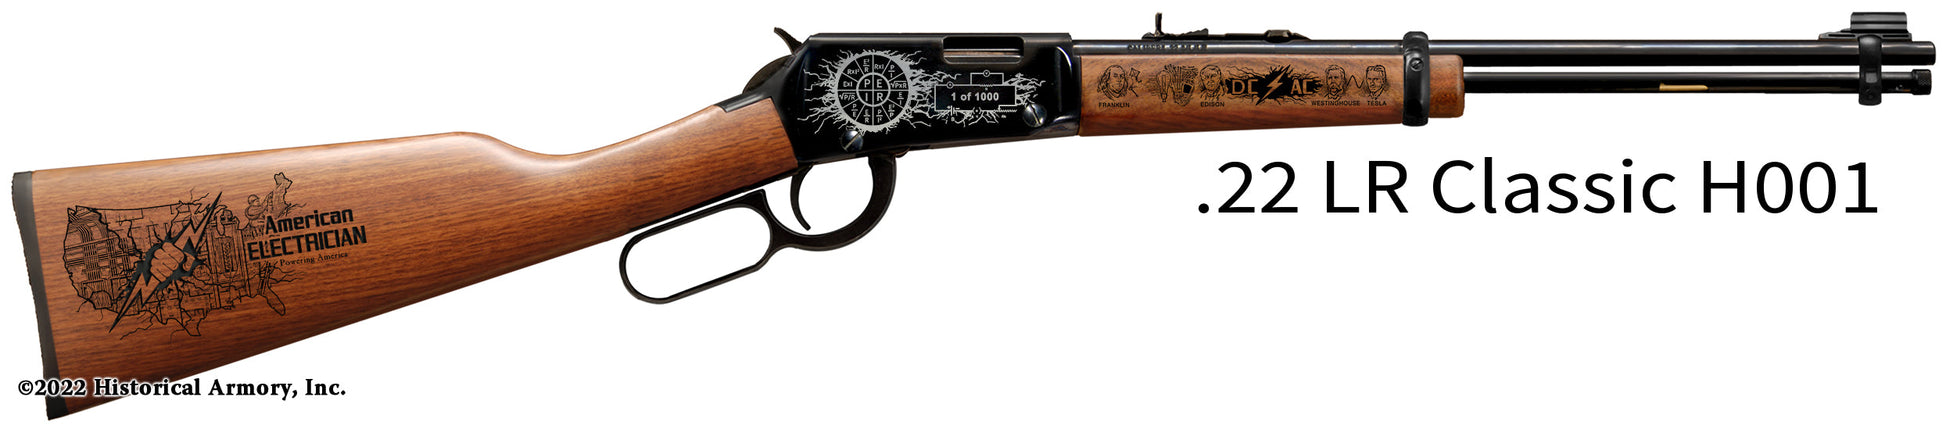 American Electrician Limited Edition Engraved Henry .22 LR Rifle